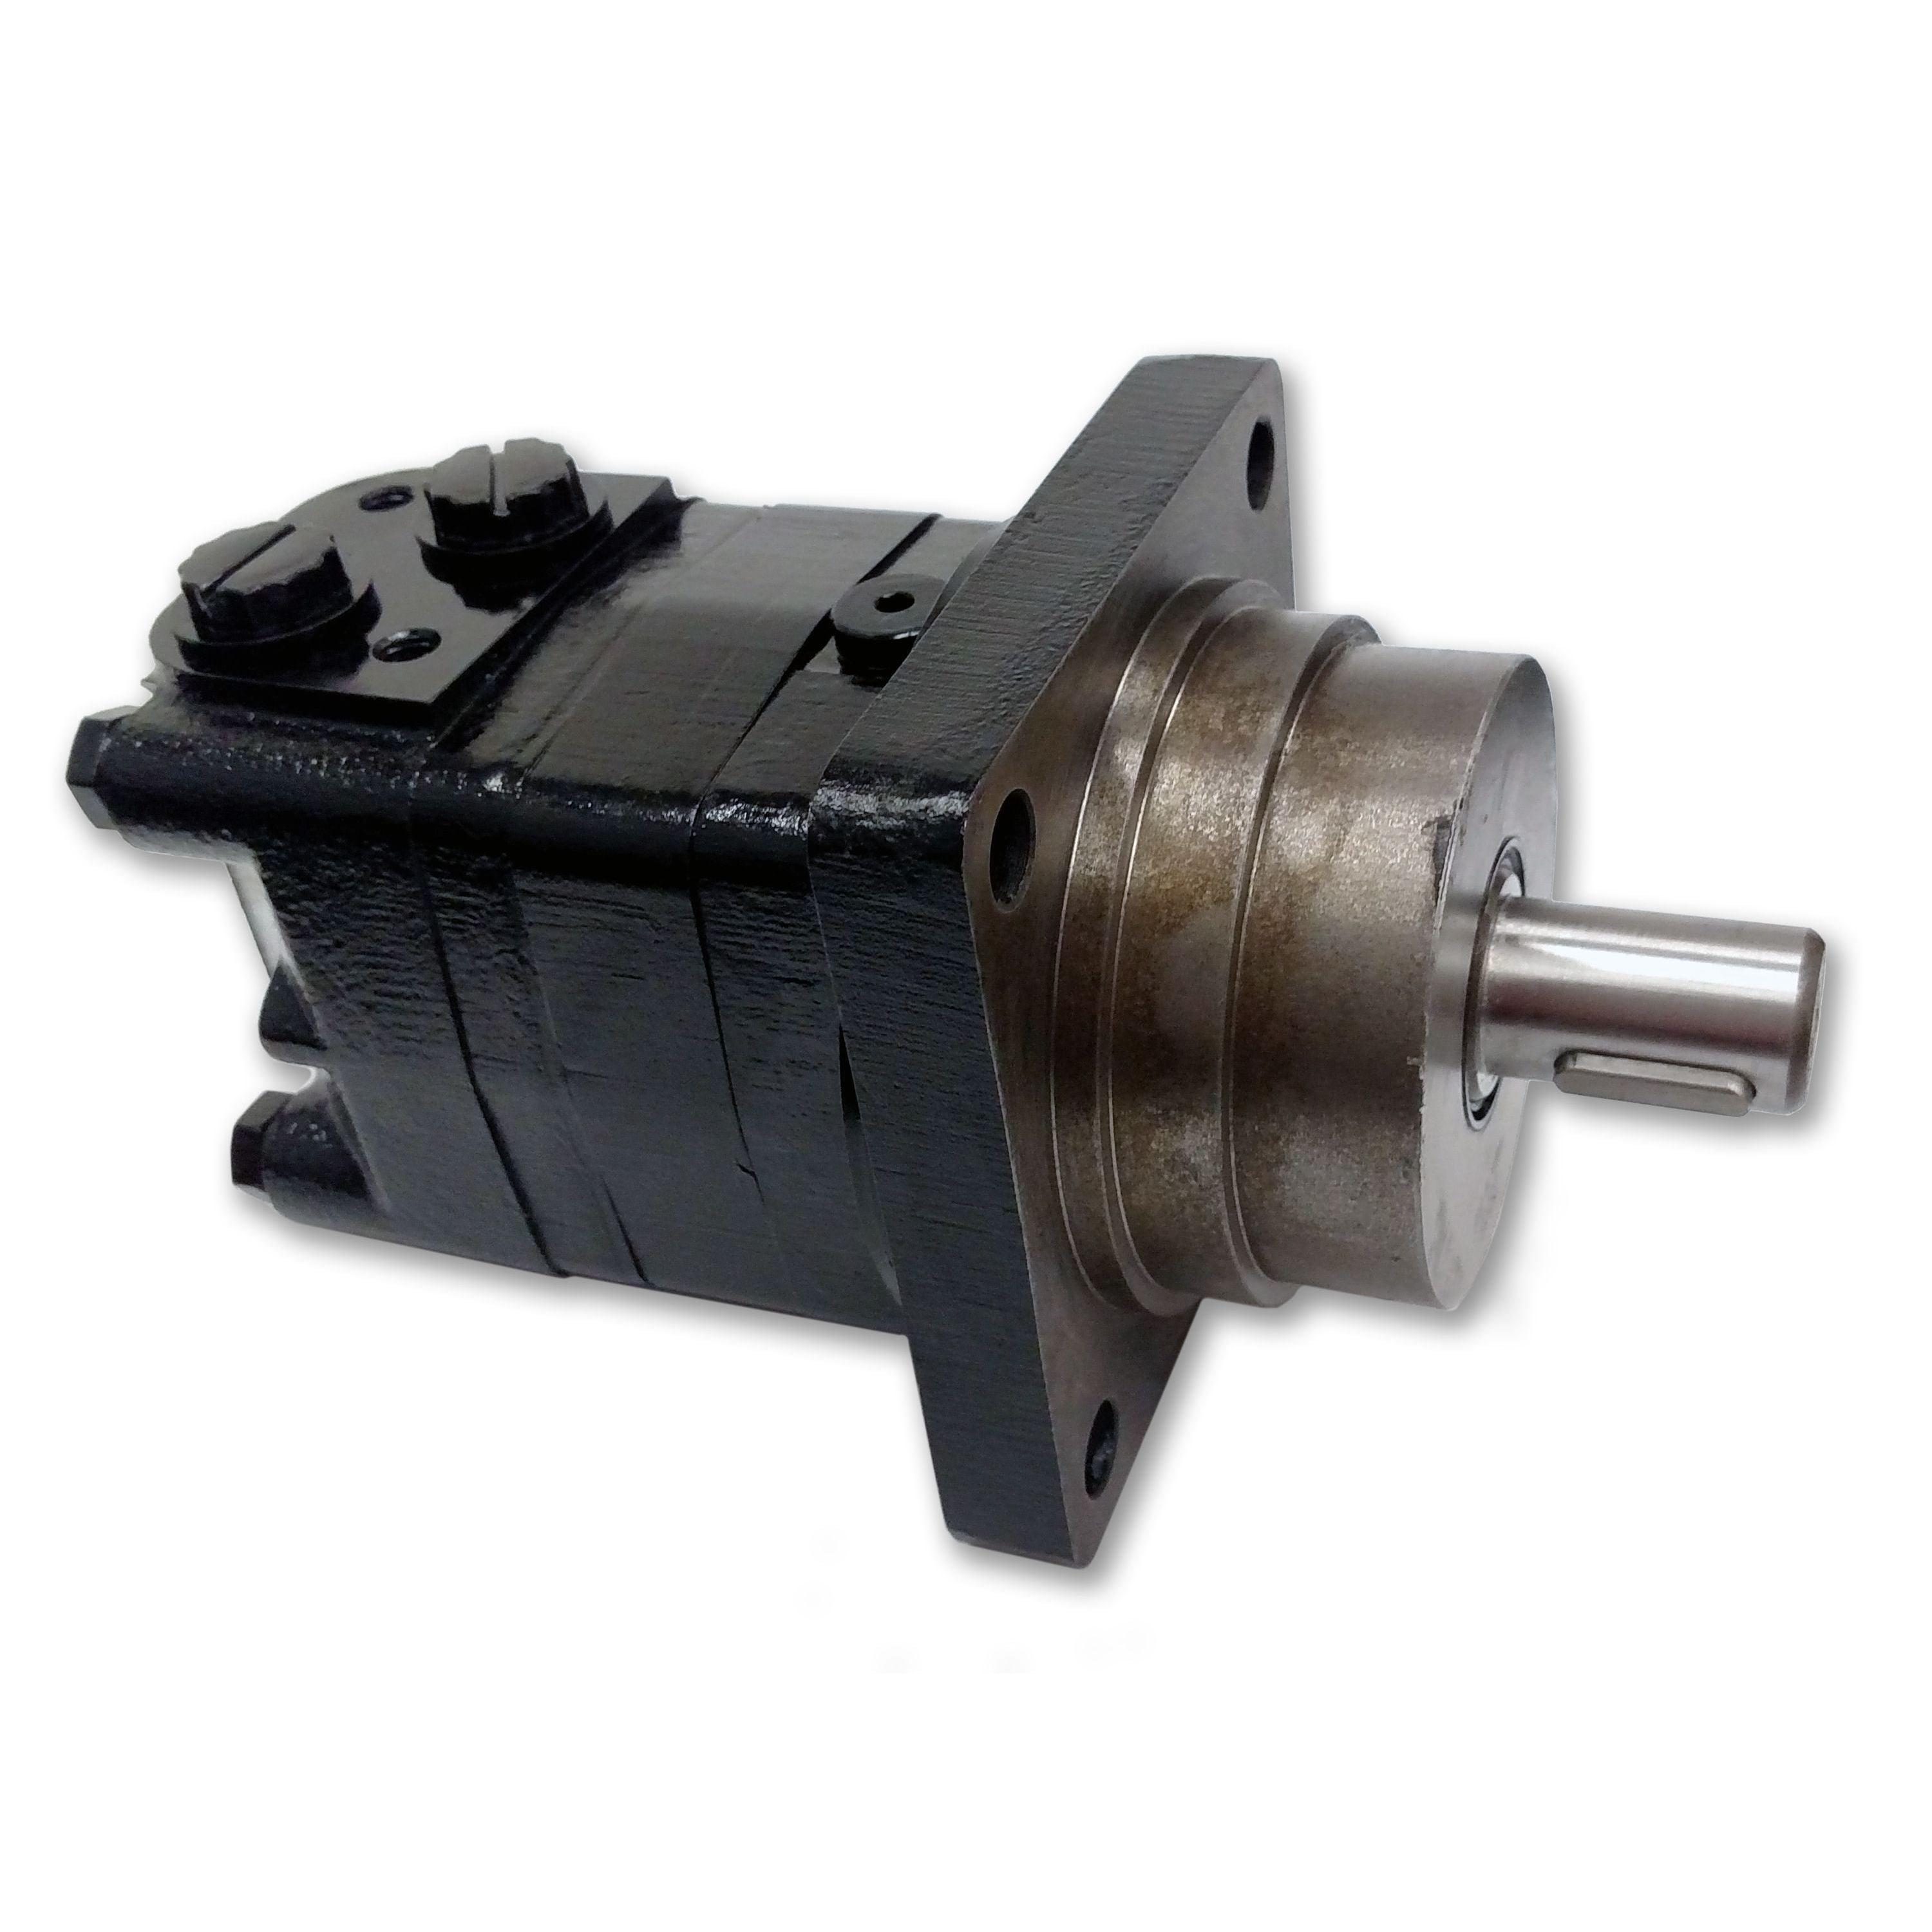 BMSY-315-WE-G-S : Dynamic LSHT Motor, 311cc, 240RPM, 7787in-lb, 2900psi Differential, 19.81GPM, Wheel Mount, 1.25" Bore x 5/16" Key Shaft, Side Ported, #10 SAE (5/8")